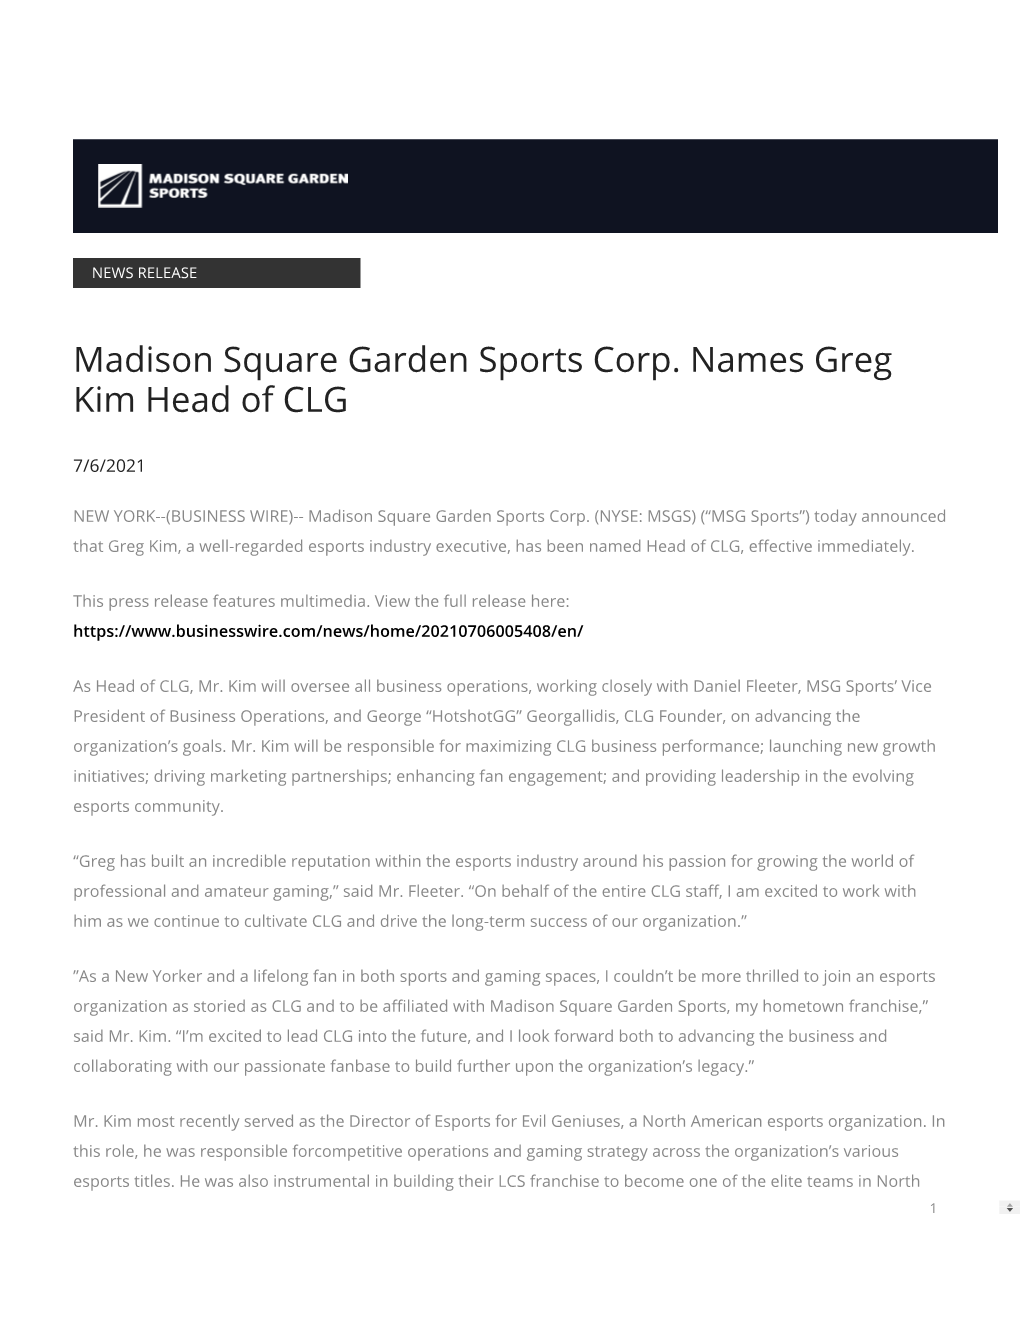 Madison Square Garden Sports Corp. Names Greg Kim Head of CLG